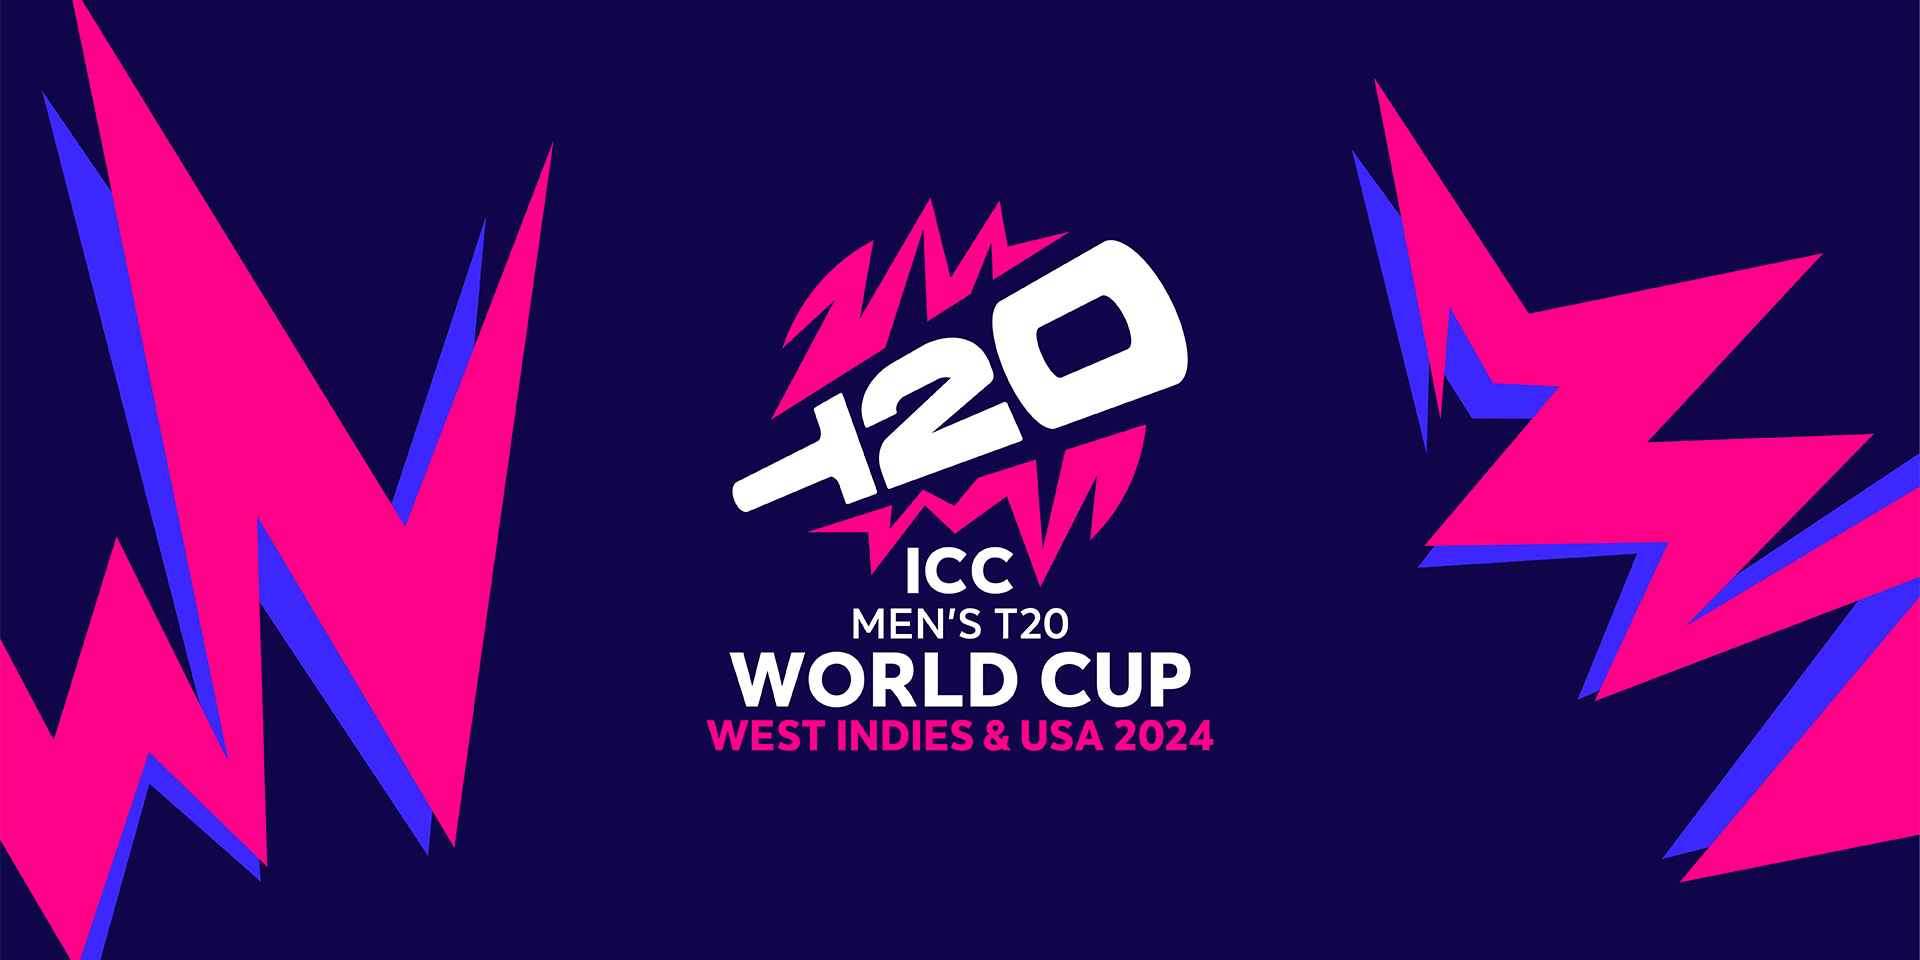 KMC to screen Nepal’s T20 World Cup matches at three locations